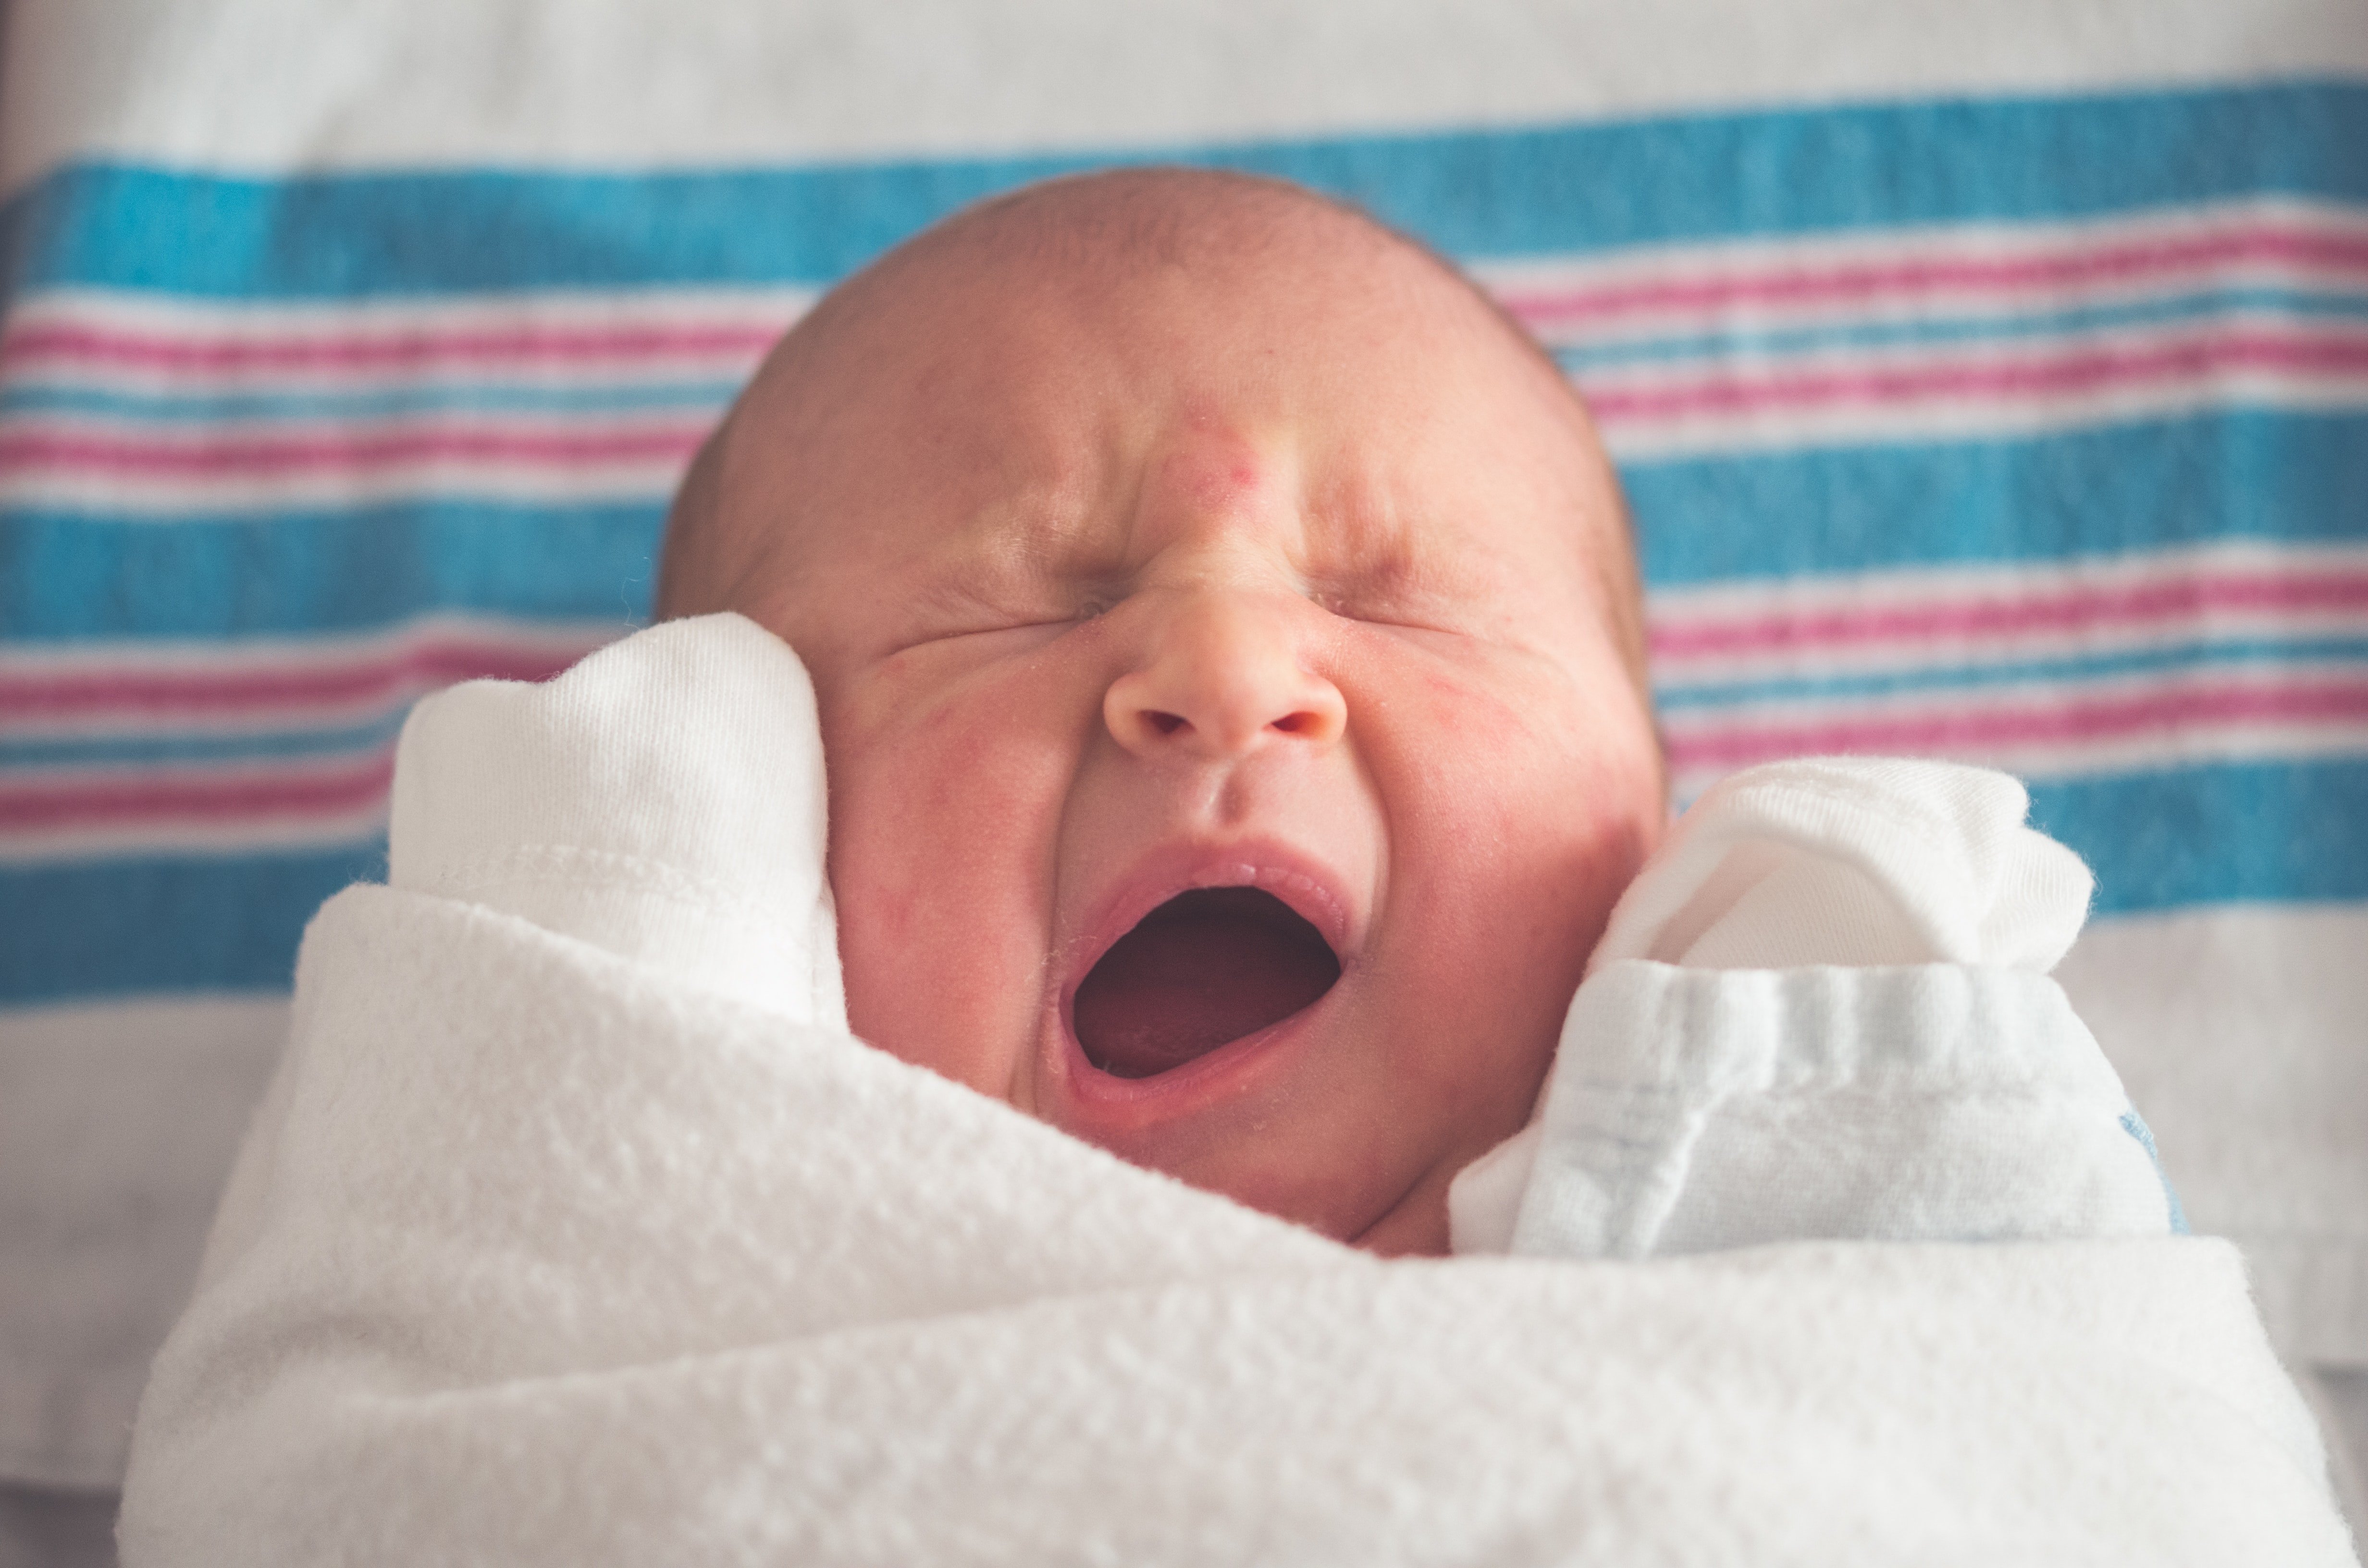 After seeing his newborn baby boy, OP realized he didn't have any of his features.| Source: Unsplash